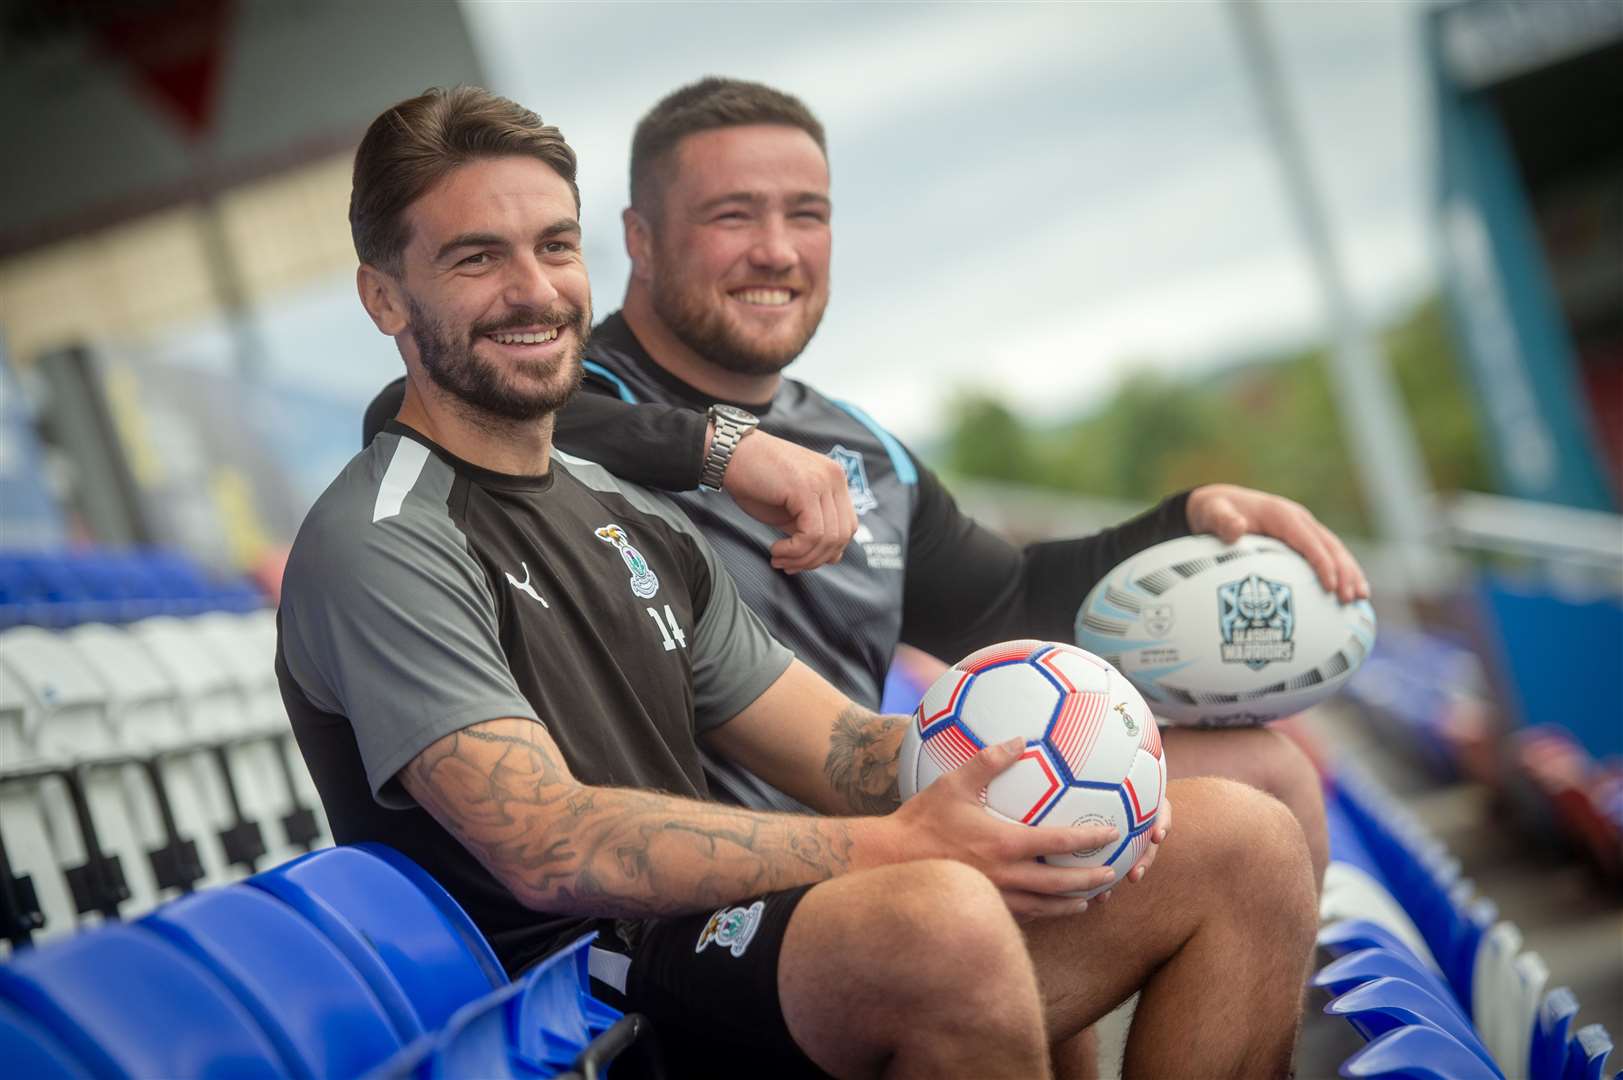 Fagerson and the Glasgow Warriors will take over Caley Thistle's stadium for a pre-season friendly next Friday evening. Picture: Callum Mackay